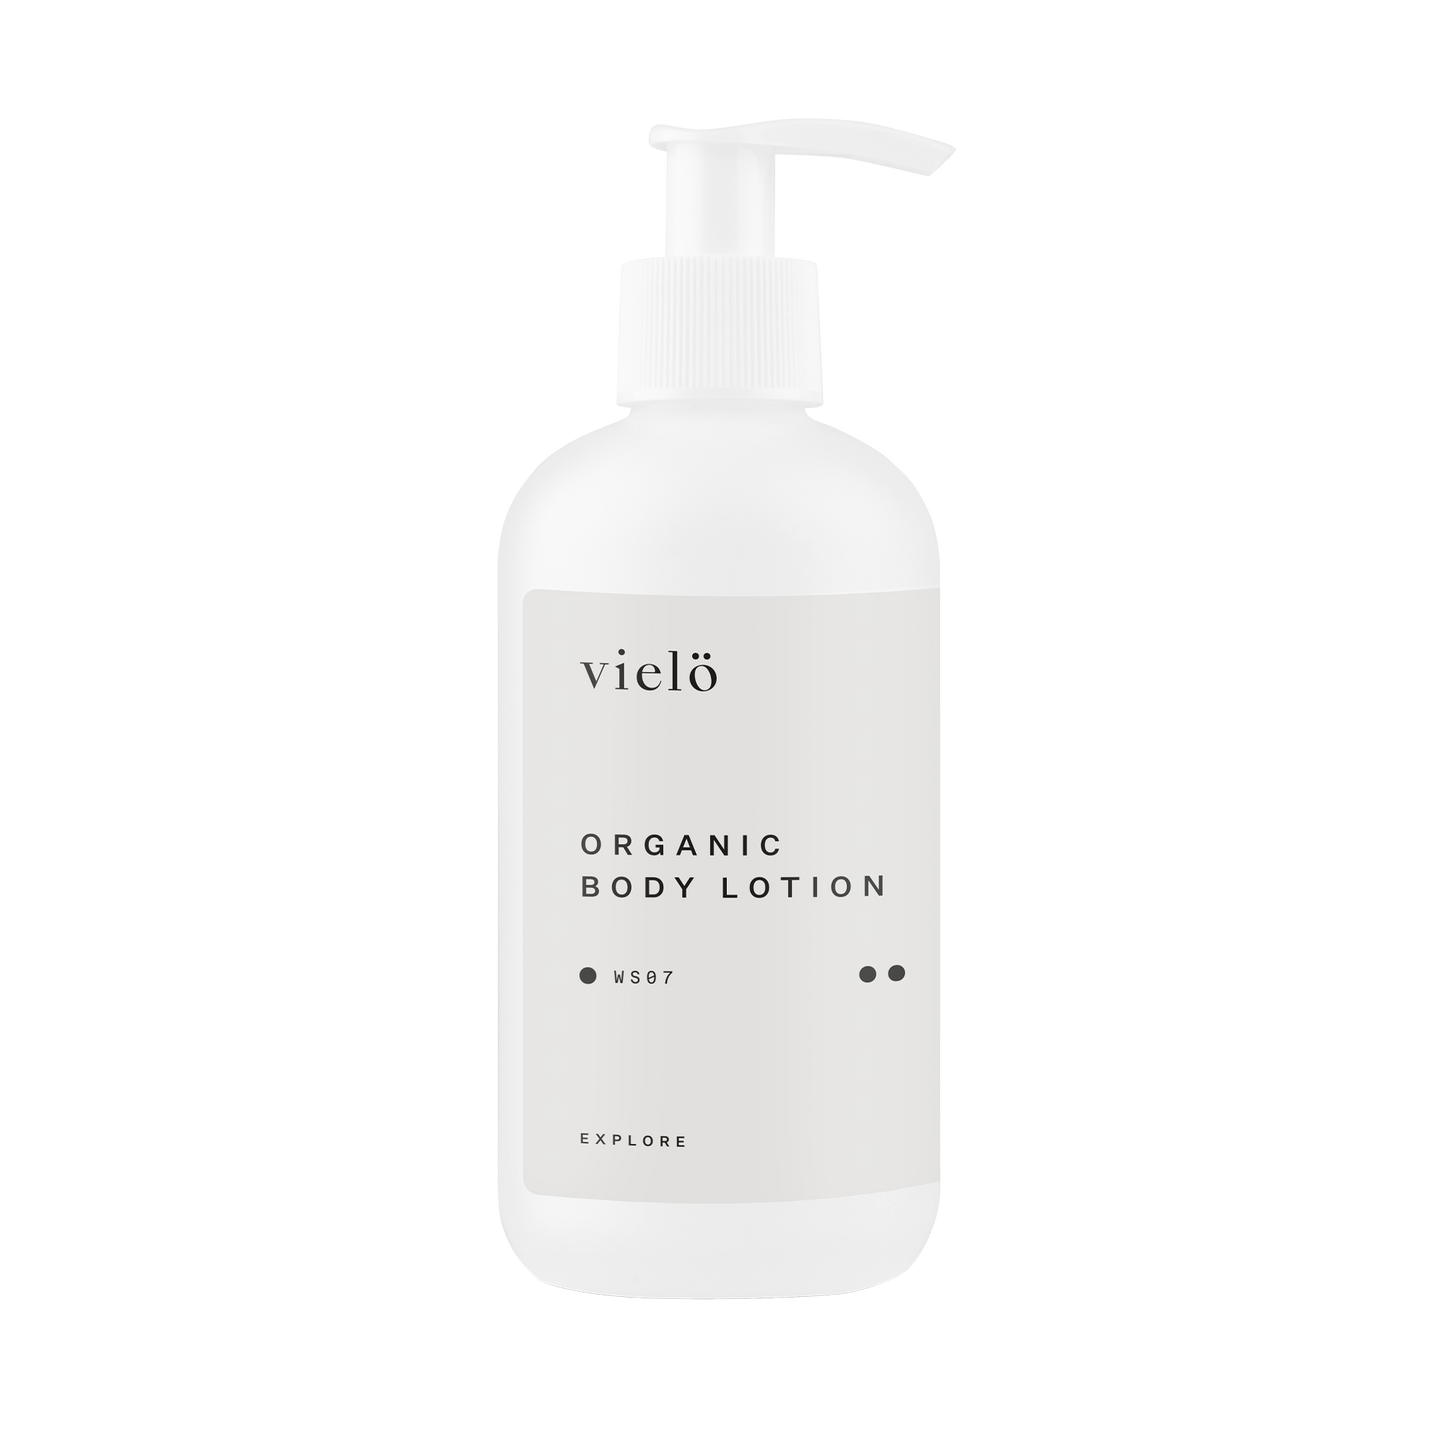 Vielo Organic Body Lotion: Nourishing organic body lotion, specially designed to moisturize and soften dry and sensitive skin. Suitable for all skin types.